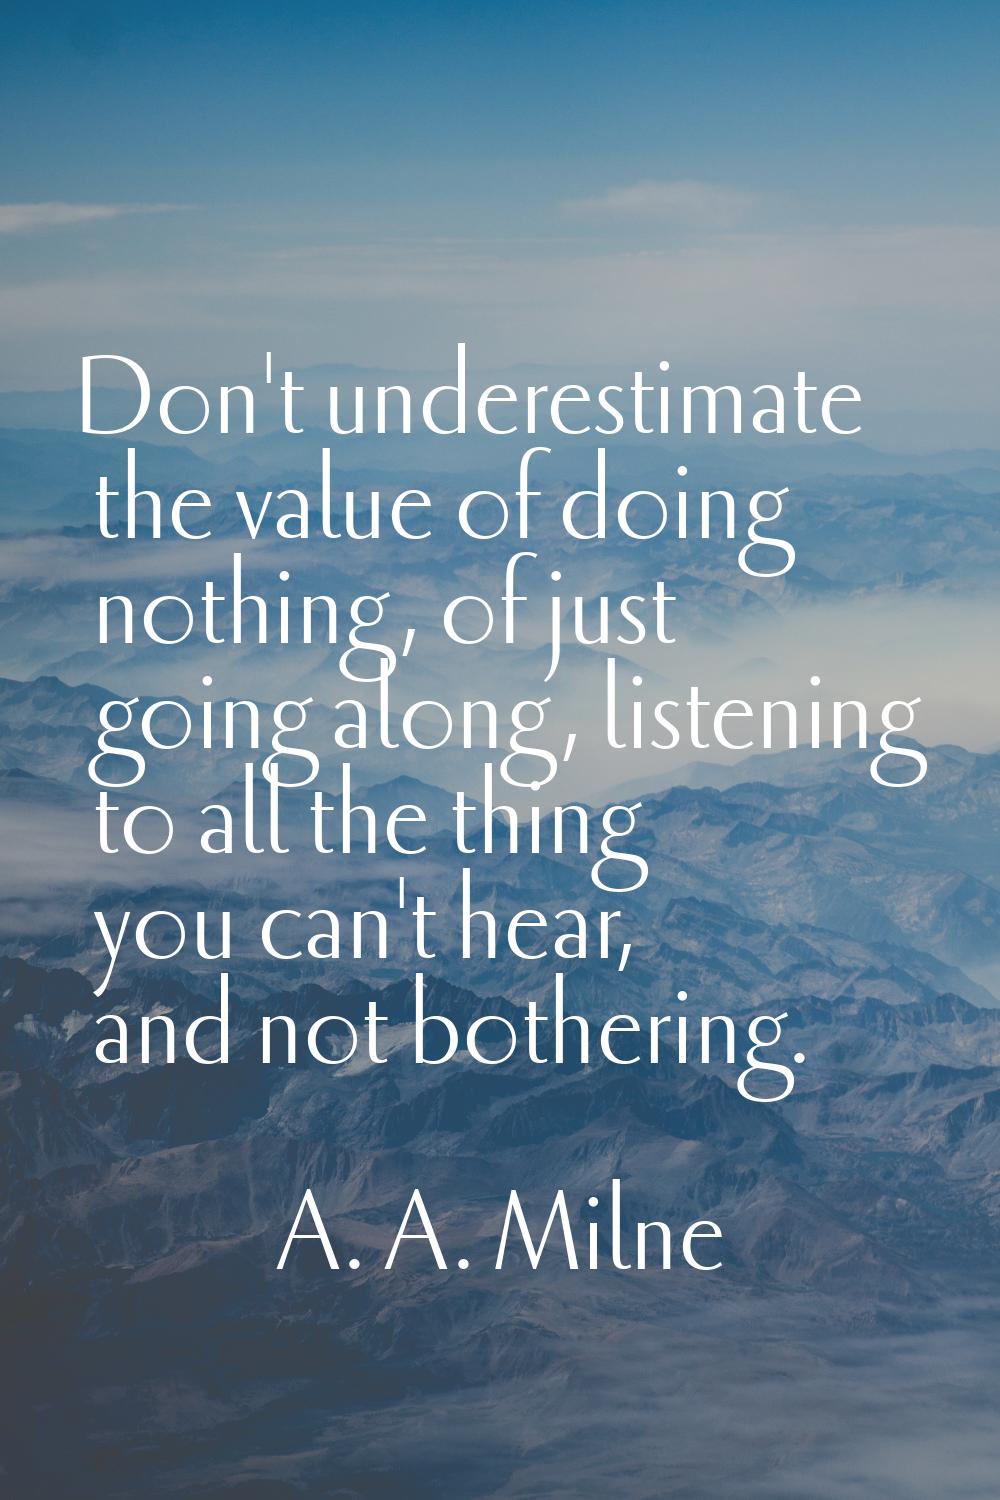 Don't underestimate the value of doing nothing, of just going along, listening to all the thing you